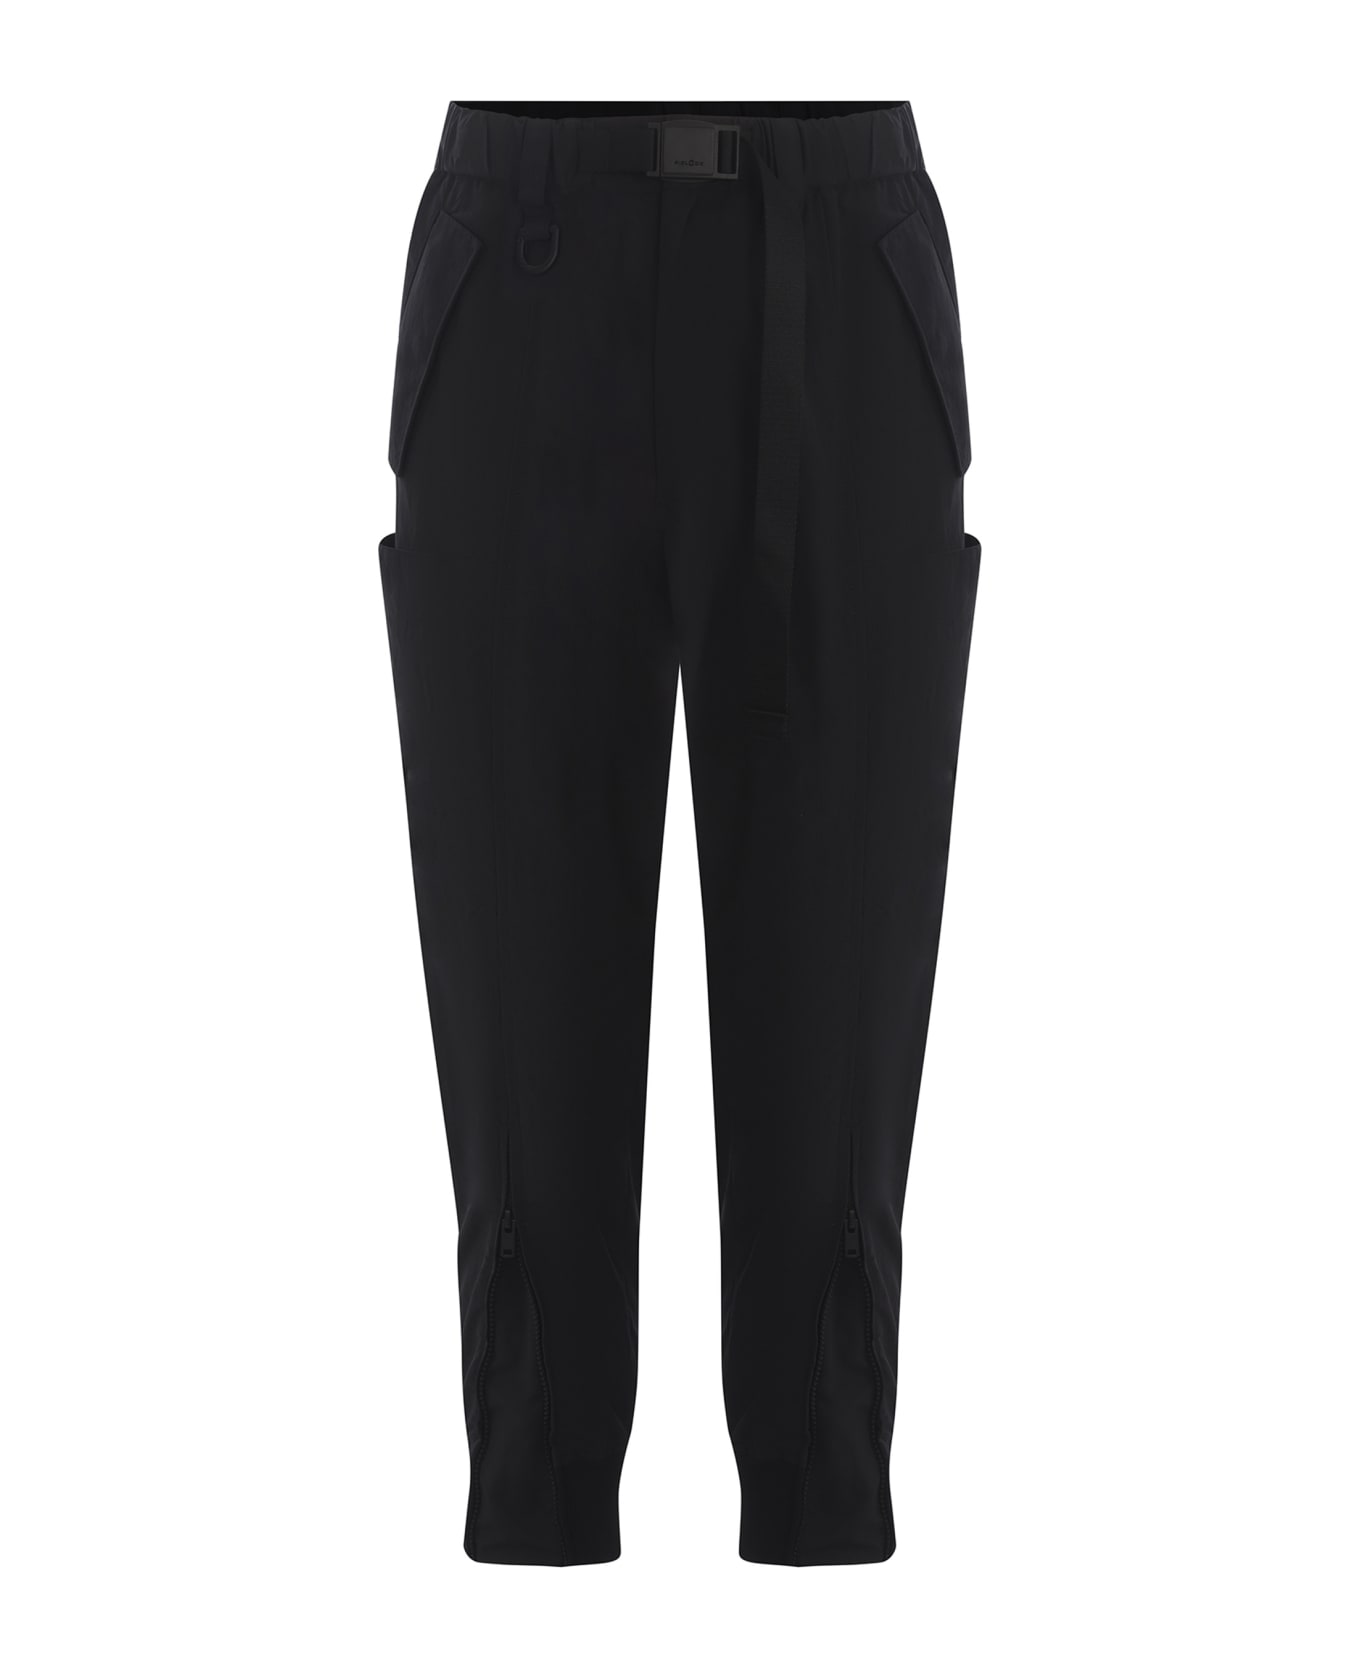 Y-3 Trousers Y-3 Made Of Nylon - Nero ボトムス